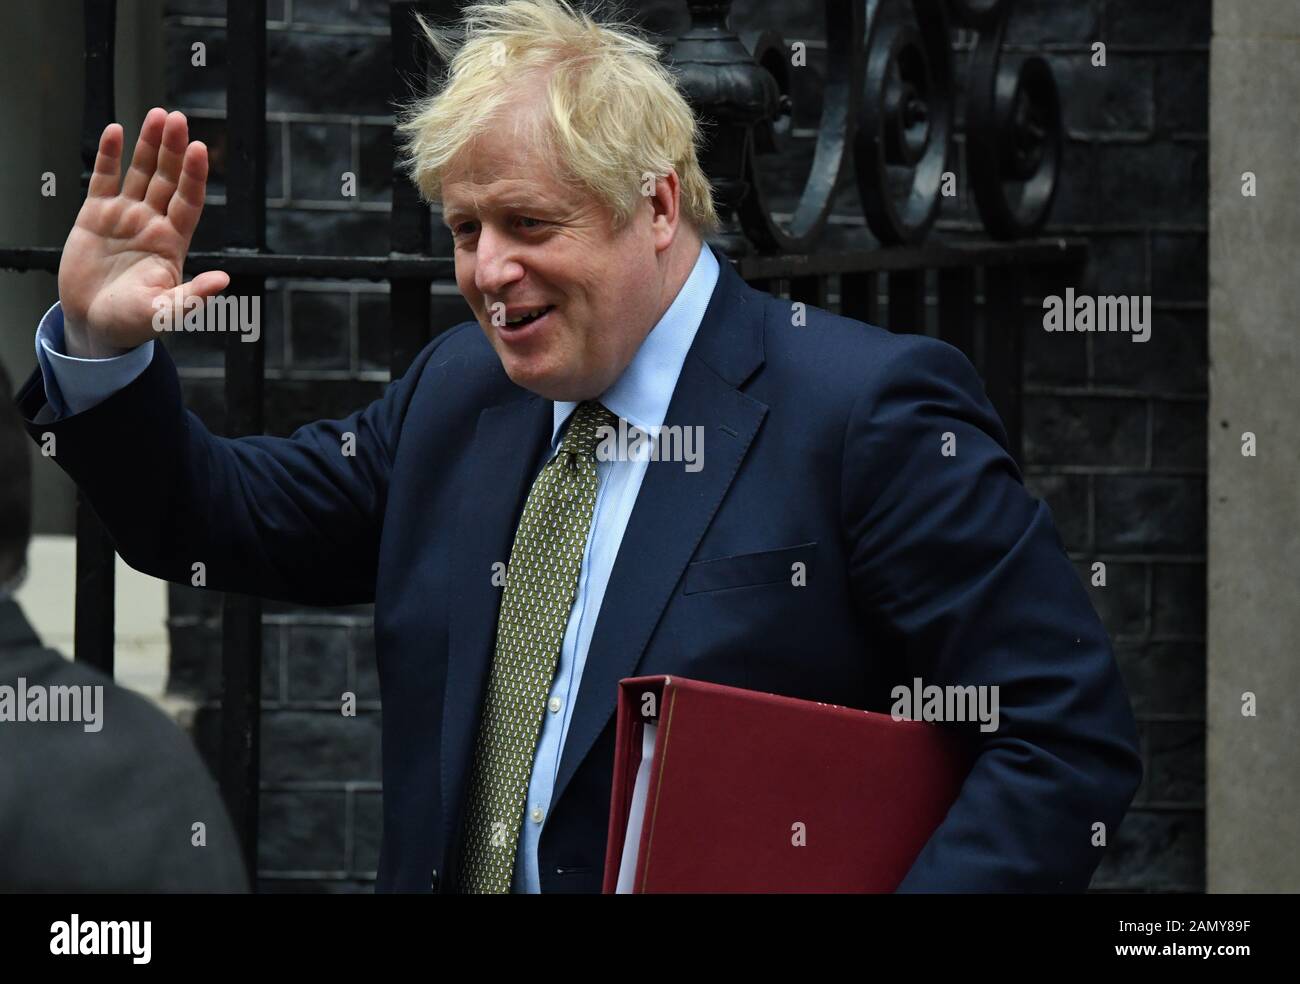 10 Downing Street, London, UK. 15th January 2020. Prime Minister Boris Johnson leaves Downing Street to attend weekly Prime Ministers Questions in Parliament. Credit: Malcolm Park/Alamy Live News. Stock Photo